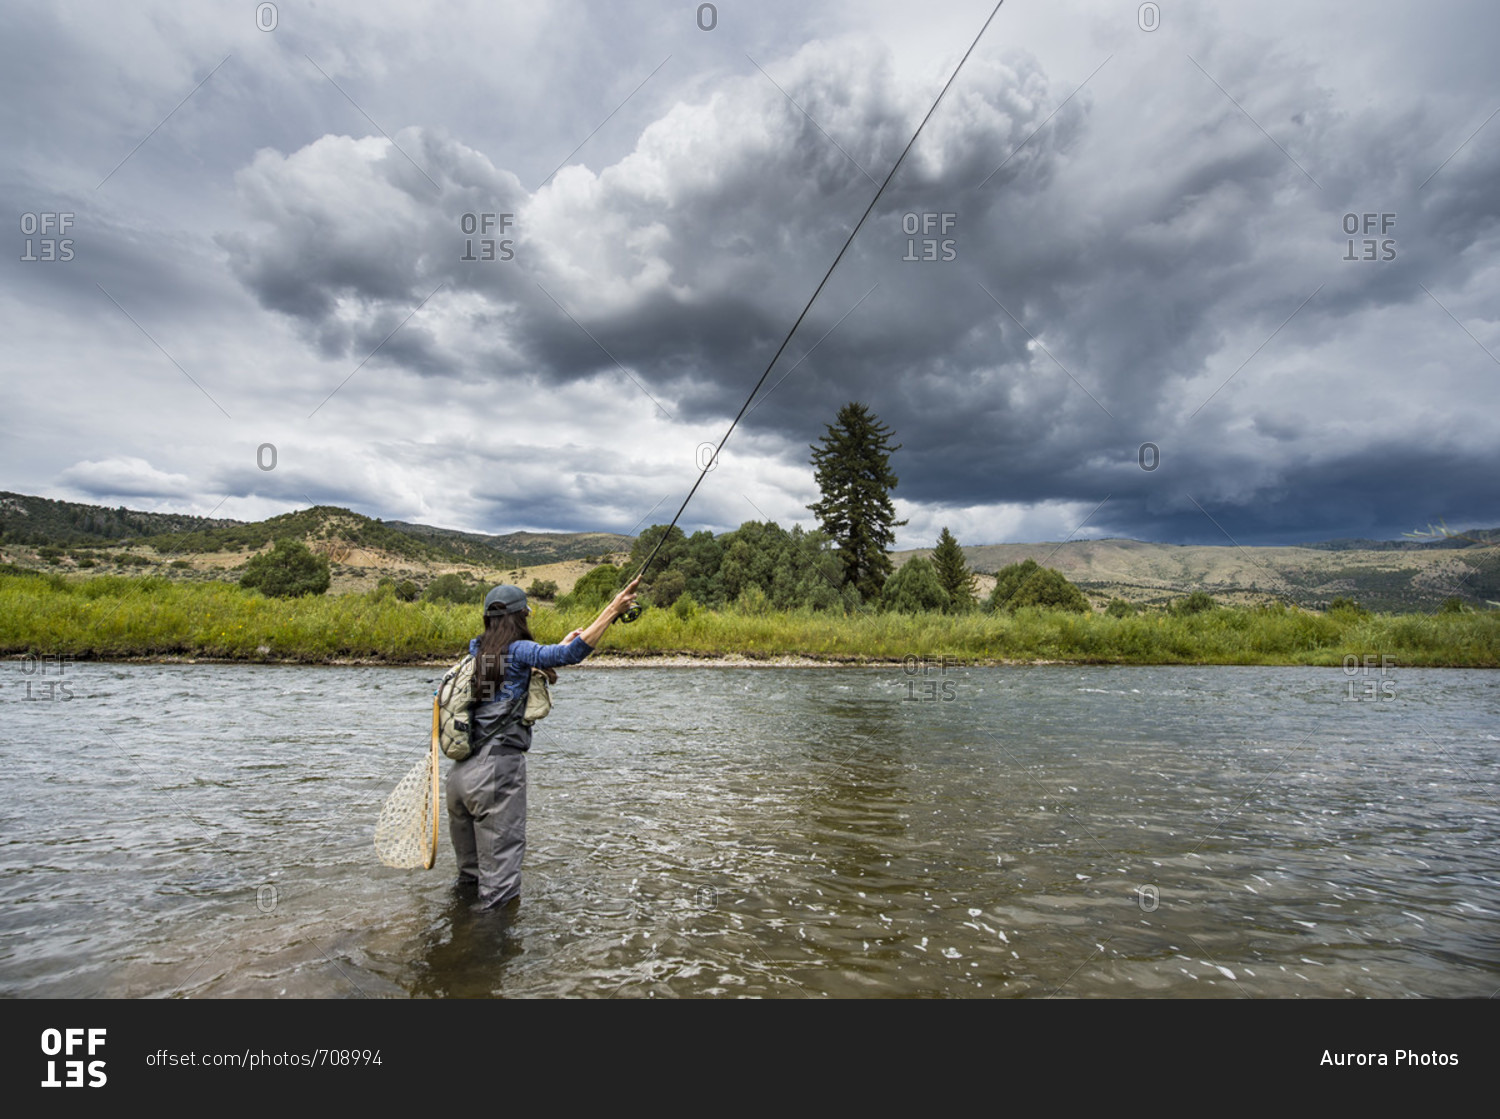 Clouds over women fishing in river, Colorado, USA